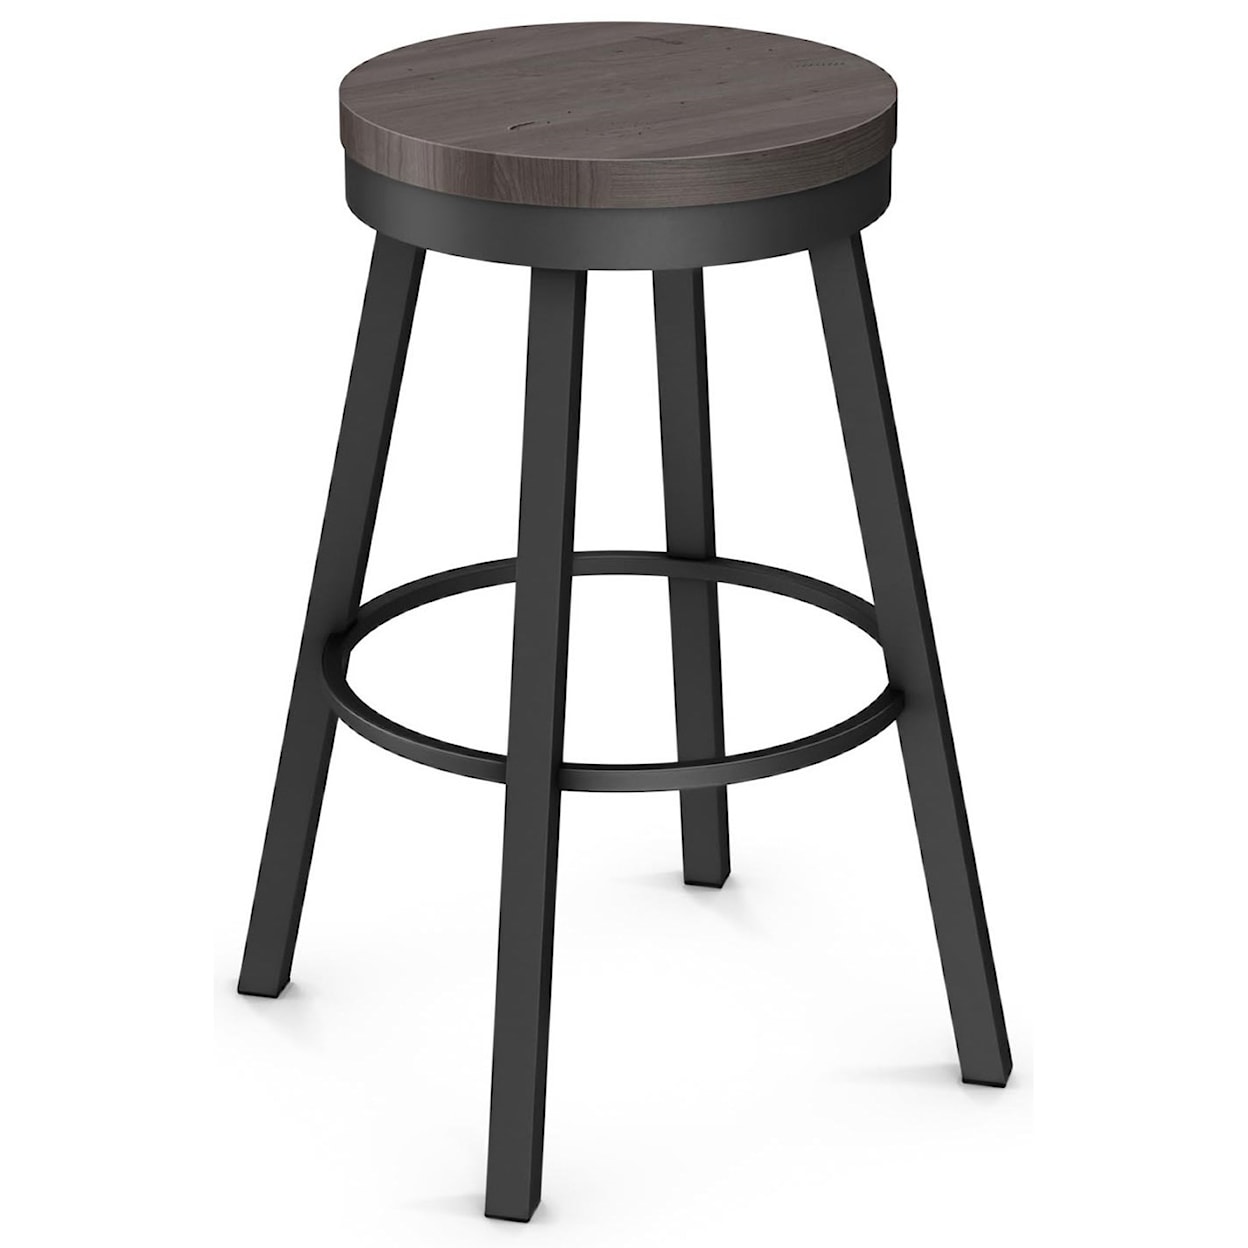 Amisco Industrial 34" Connor Spectator Height Swivel Stool